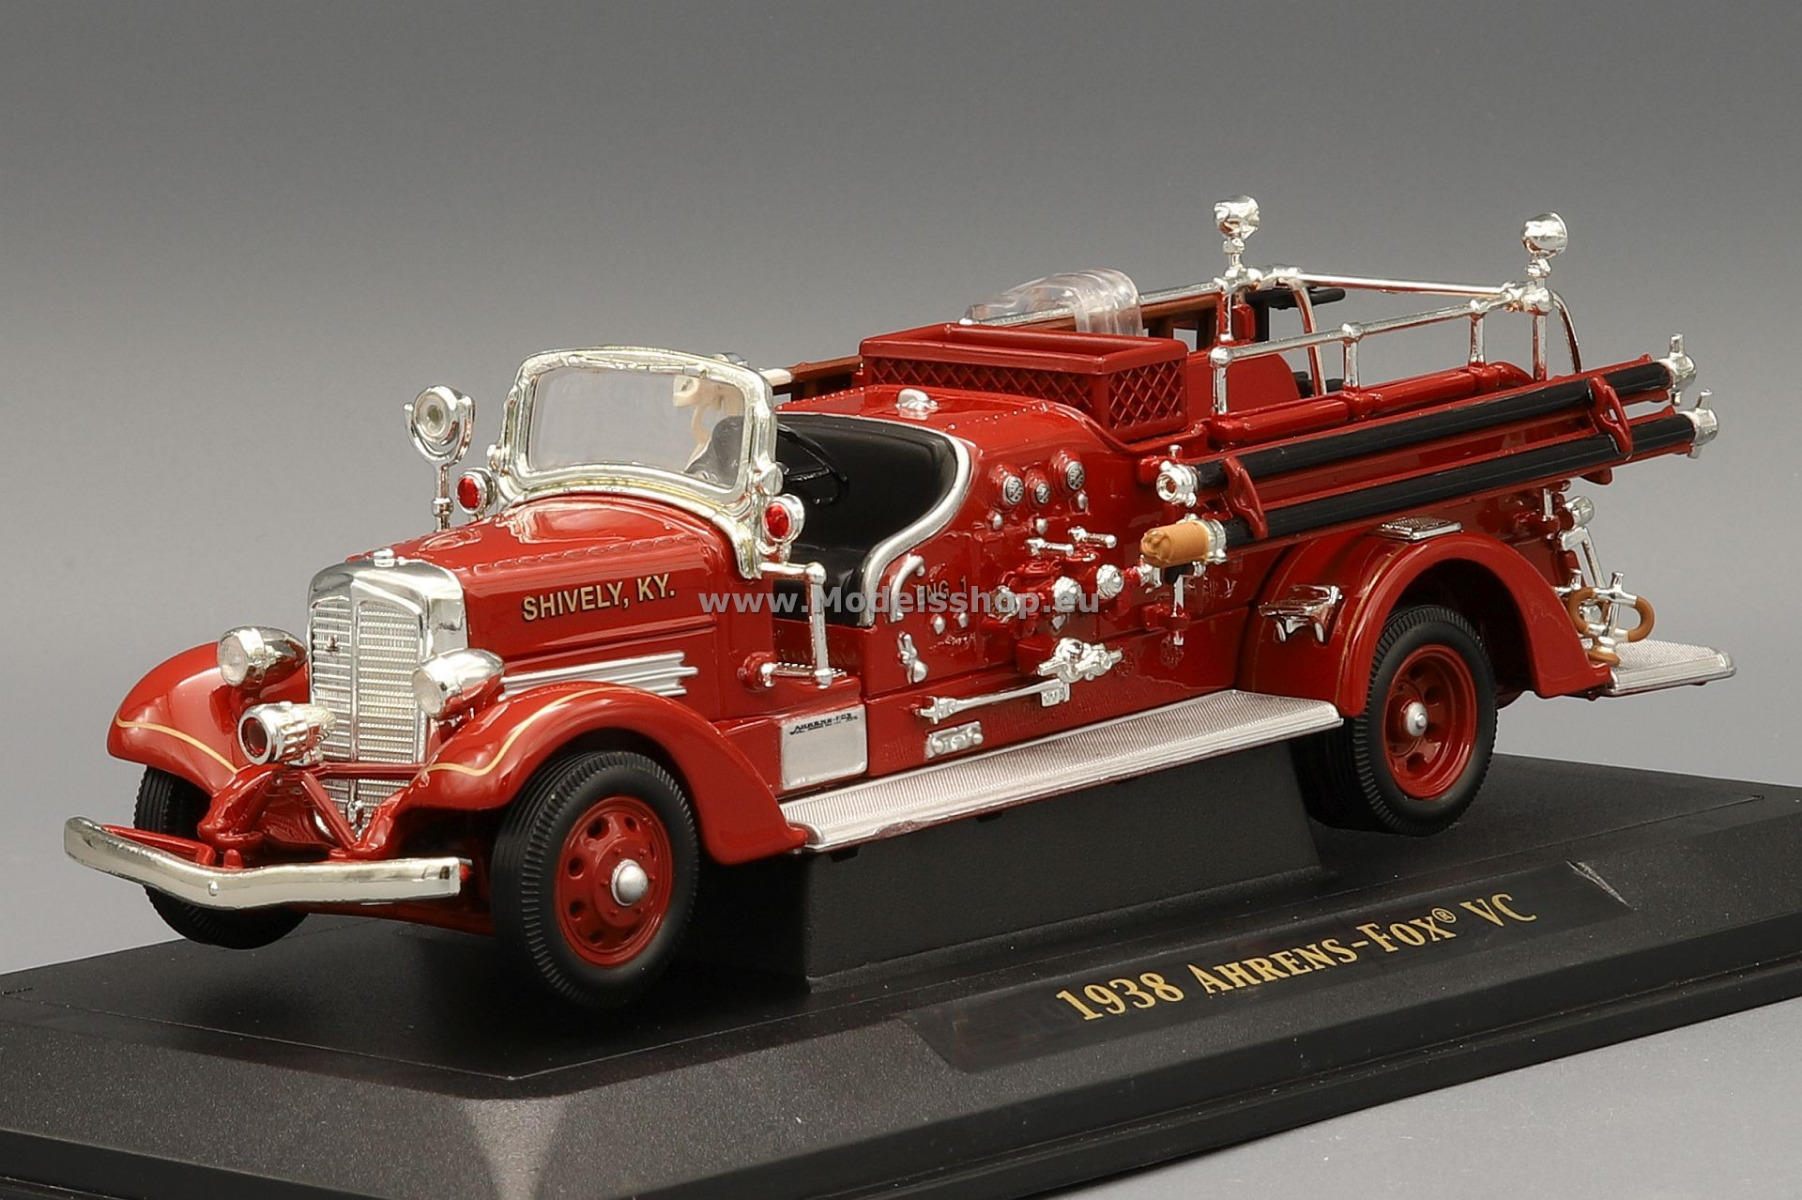 Fire engine Ahrens Fox VC, Shively Fire Dept. 1938